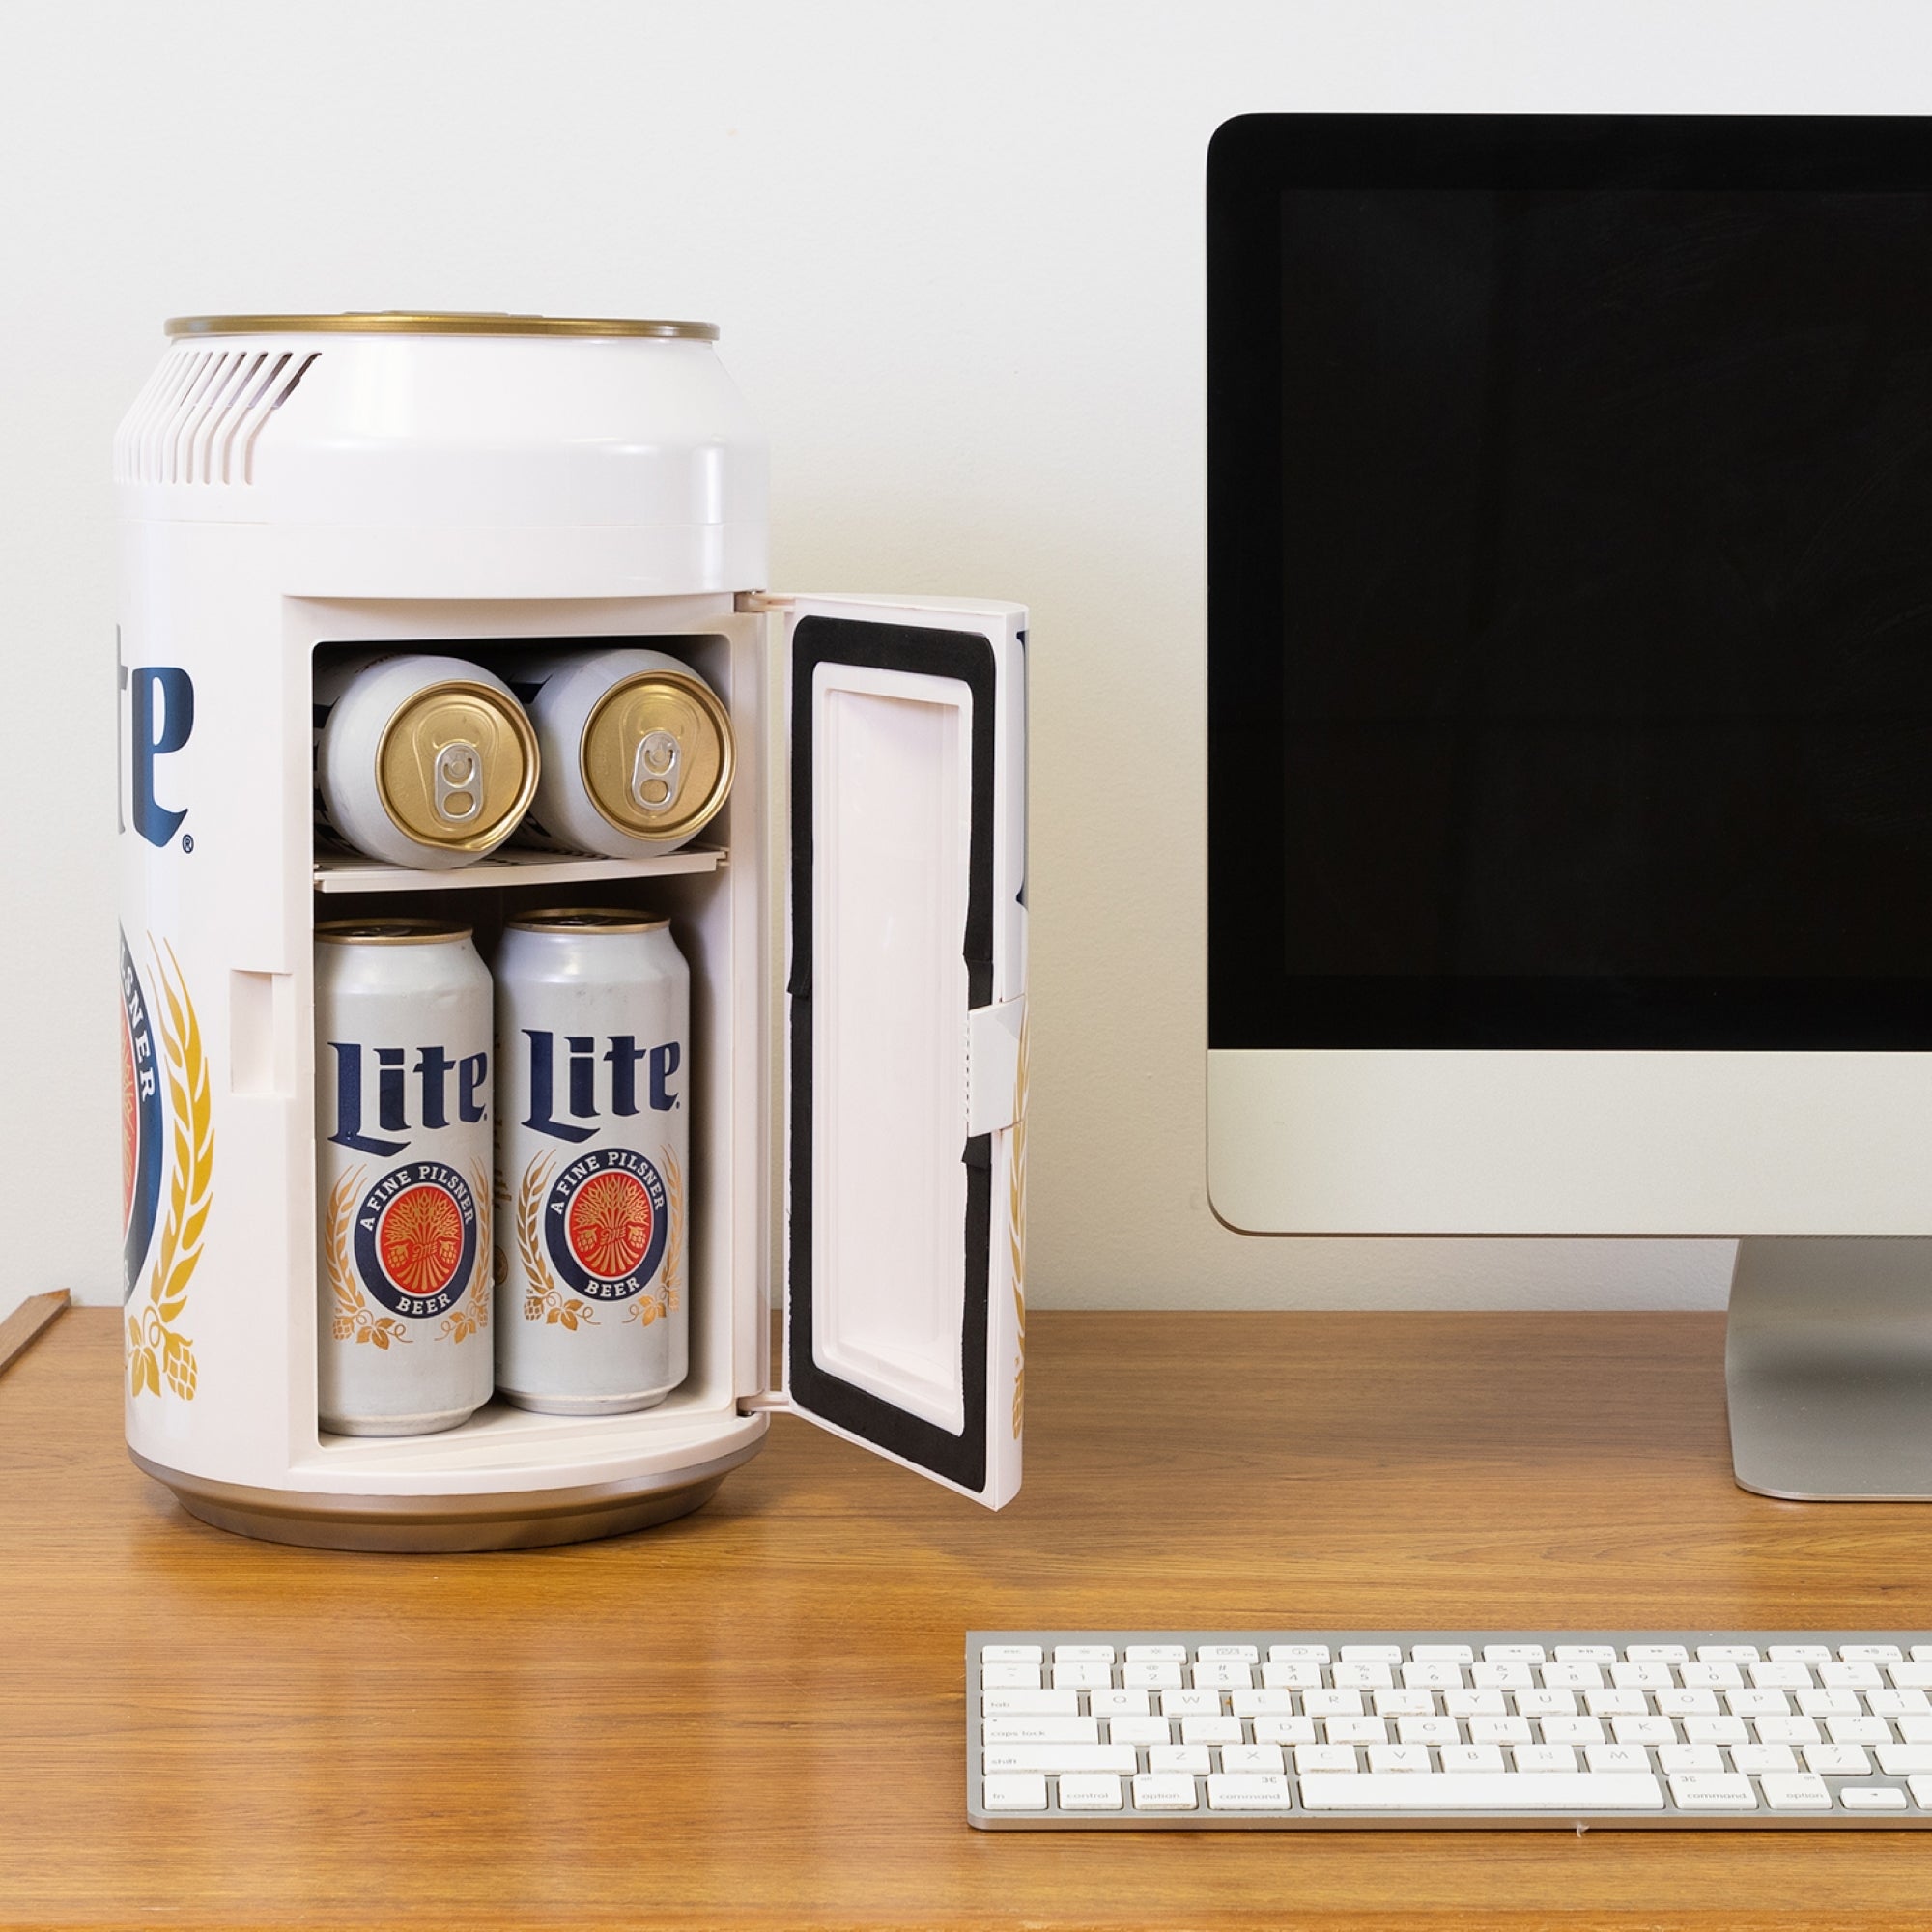 Lifestyle image of Miller Lite can-shaped mini fridge, open with 6 cans of Miller Lite beer inside, on a wooden desktop with a computer monitor and keyboard beside it